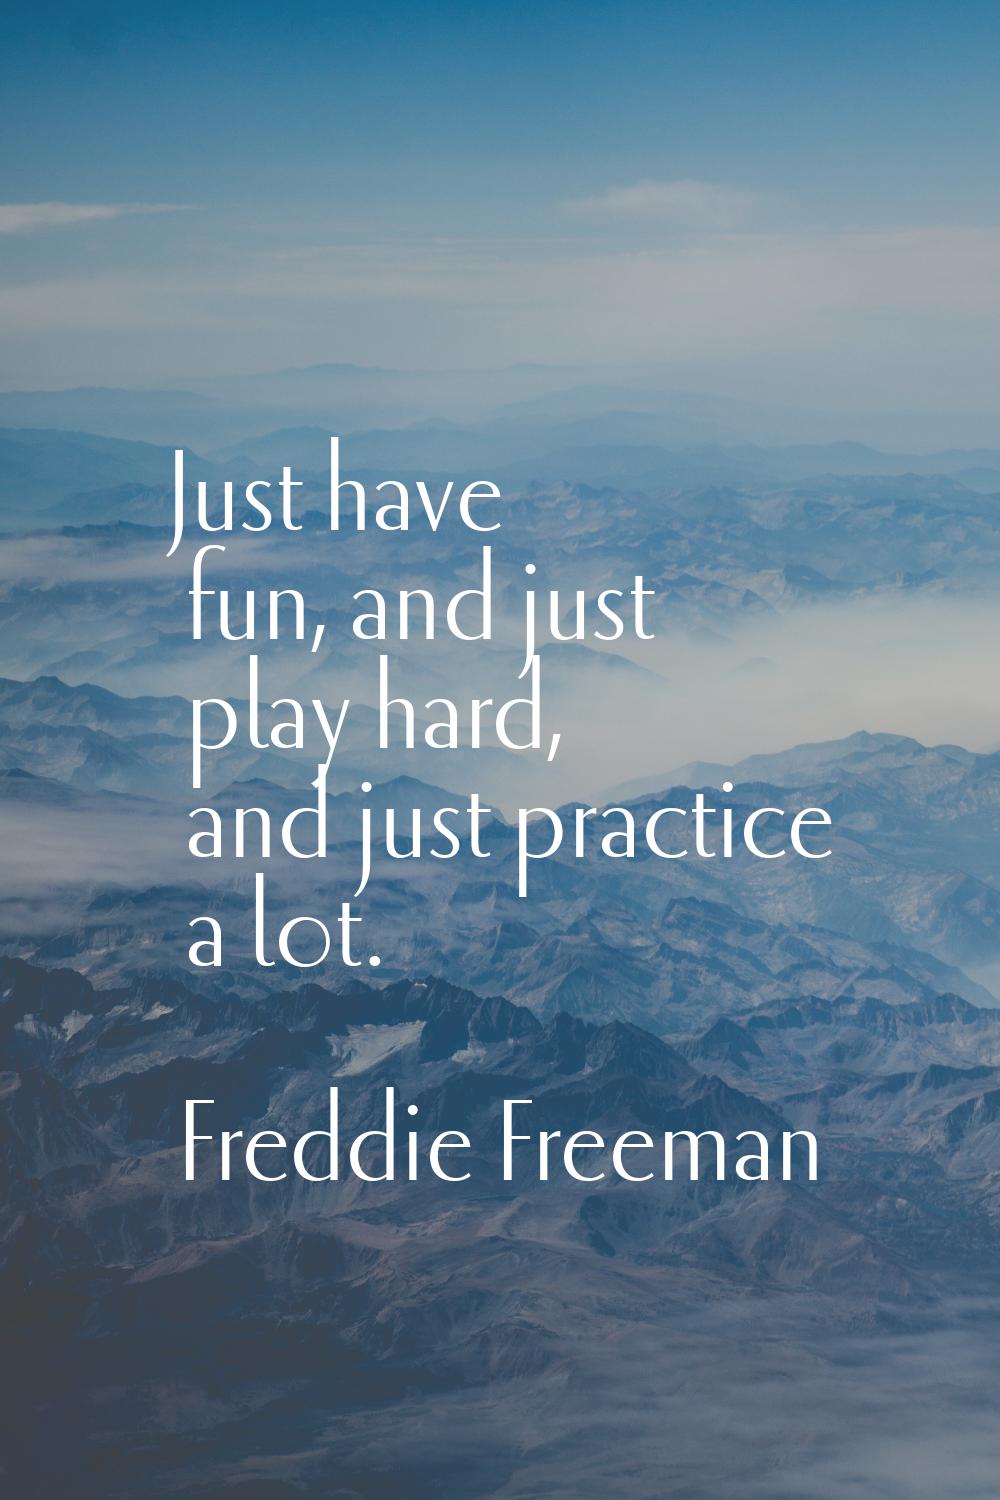 Just have fun, and just play hard, and just practice a lot.